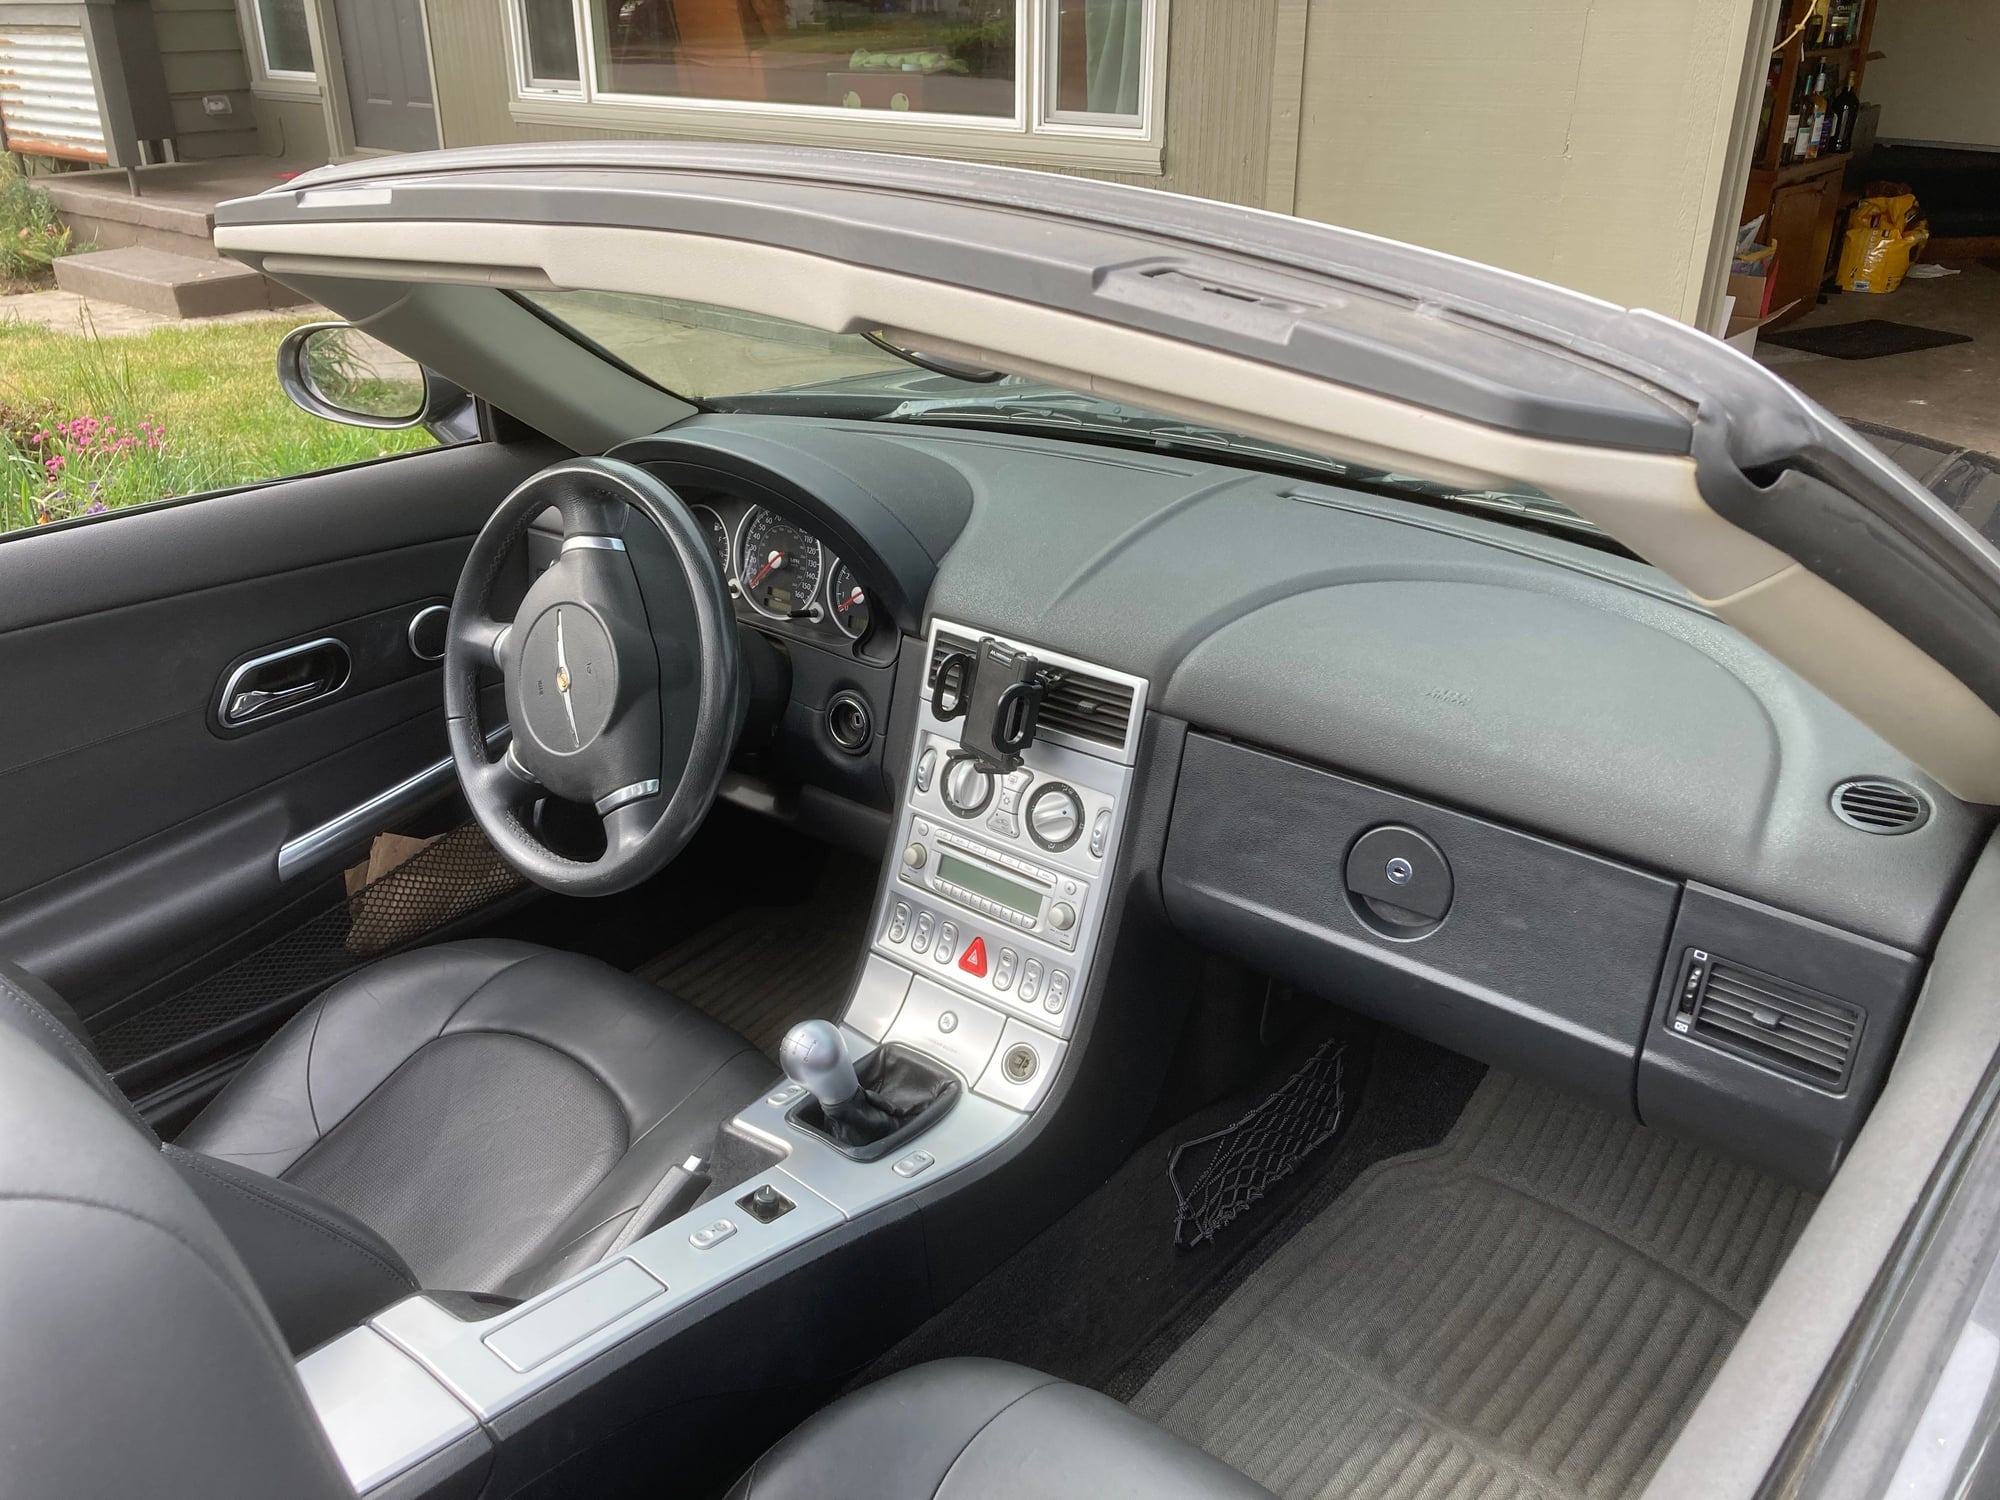 2005 Chrysler Crossfire - 2005 Crossfire Limited Roadster, 6 Speed - Used - VIN 1C3AN65LX5X051522 - 18,665 Miles - 6 cyl - 2WD - Manual - Convertible - Gray - Springfield, OR 97477, United States